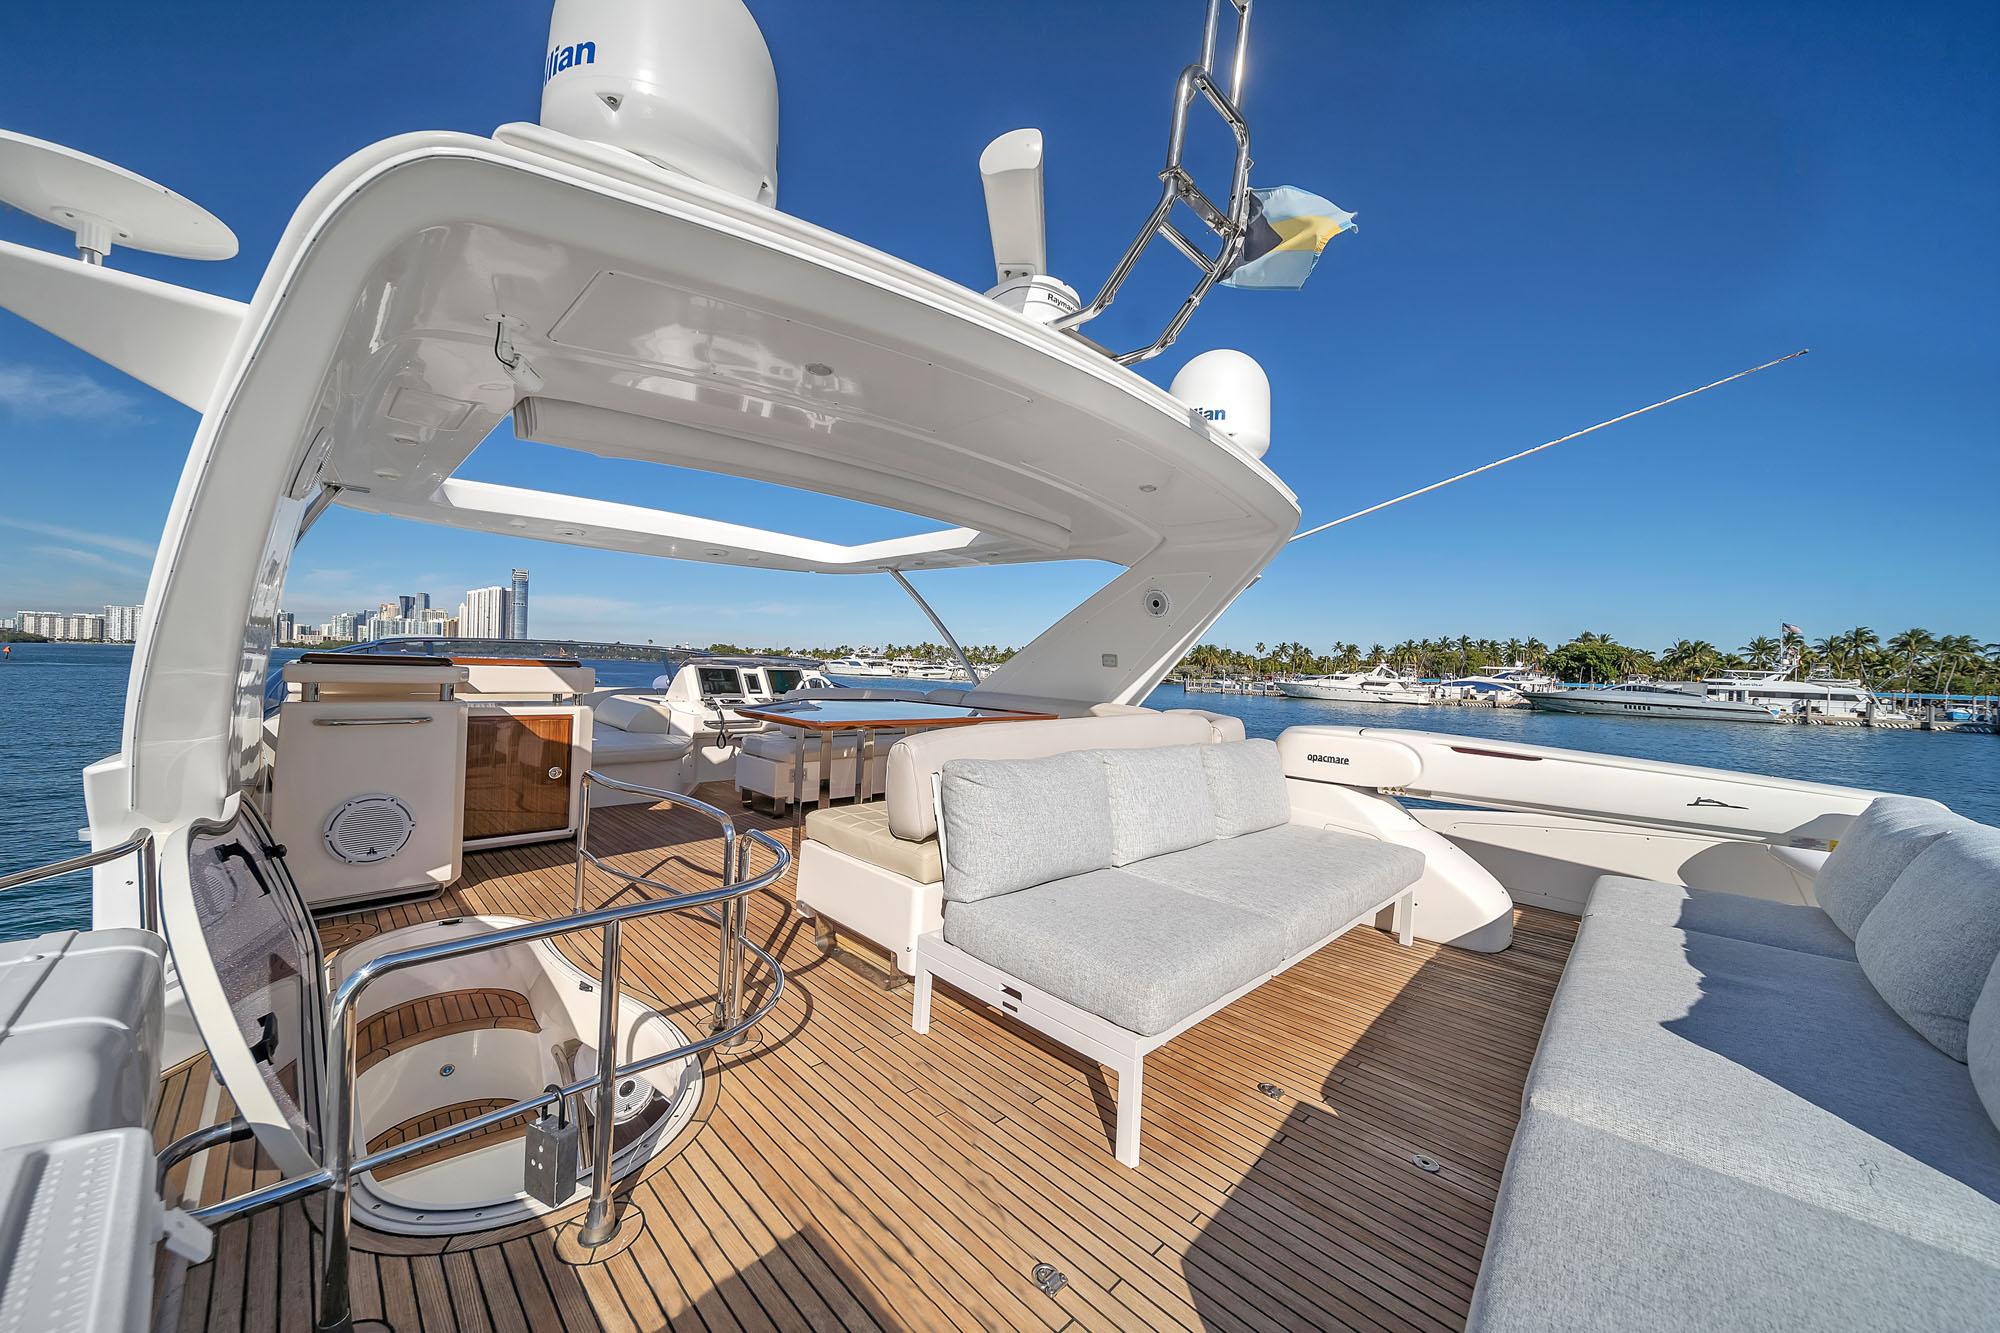 Flybridge Aft and Access to Lower Deck